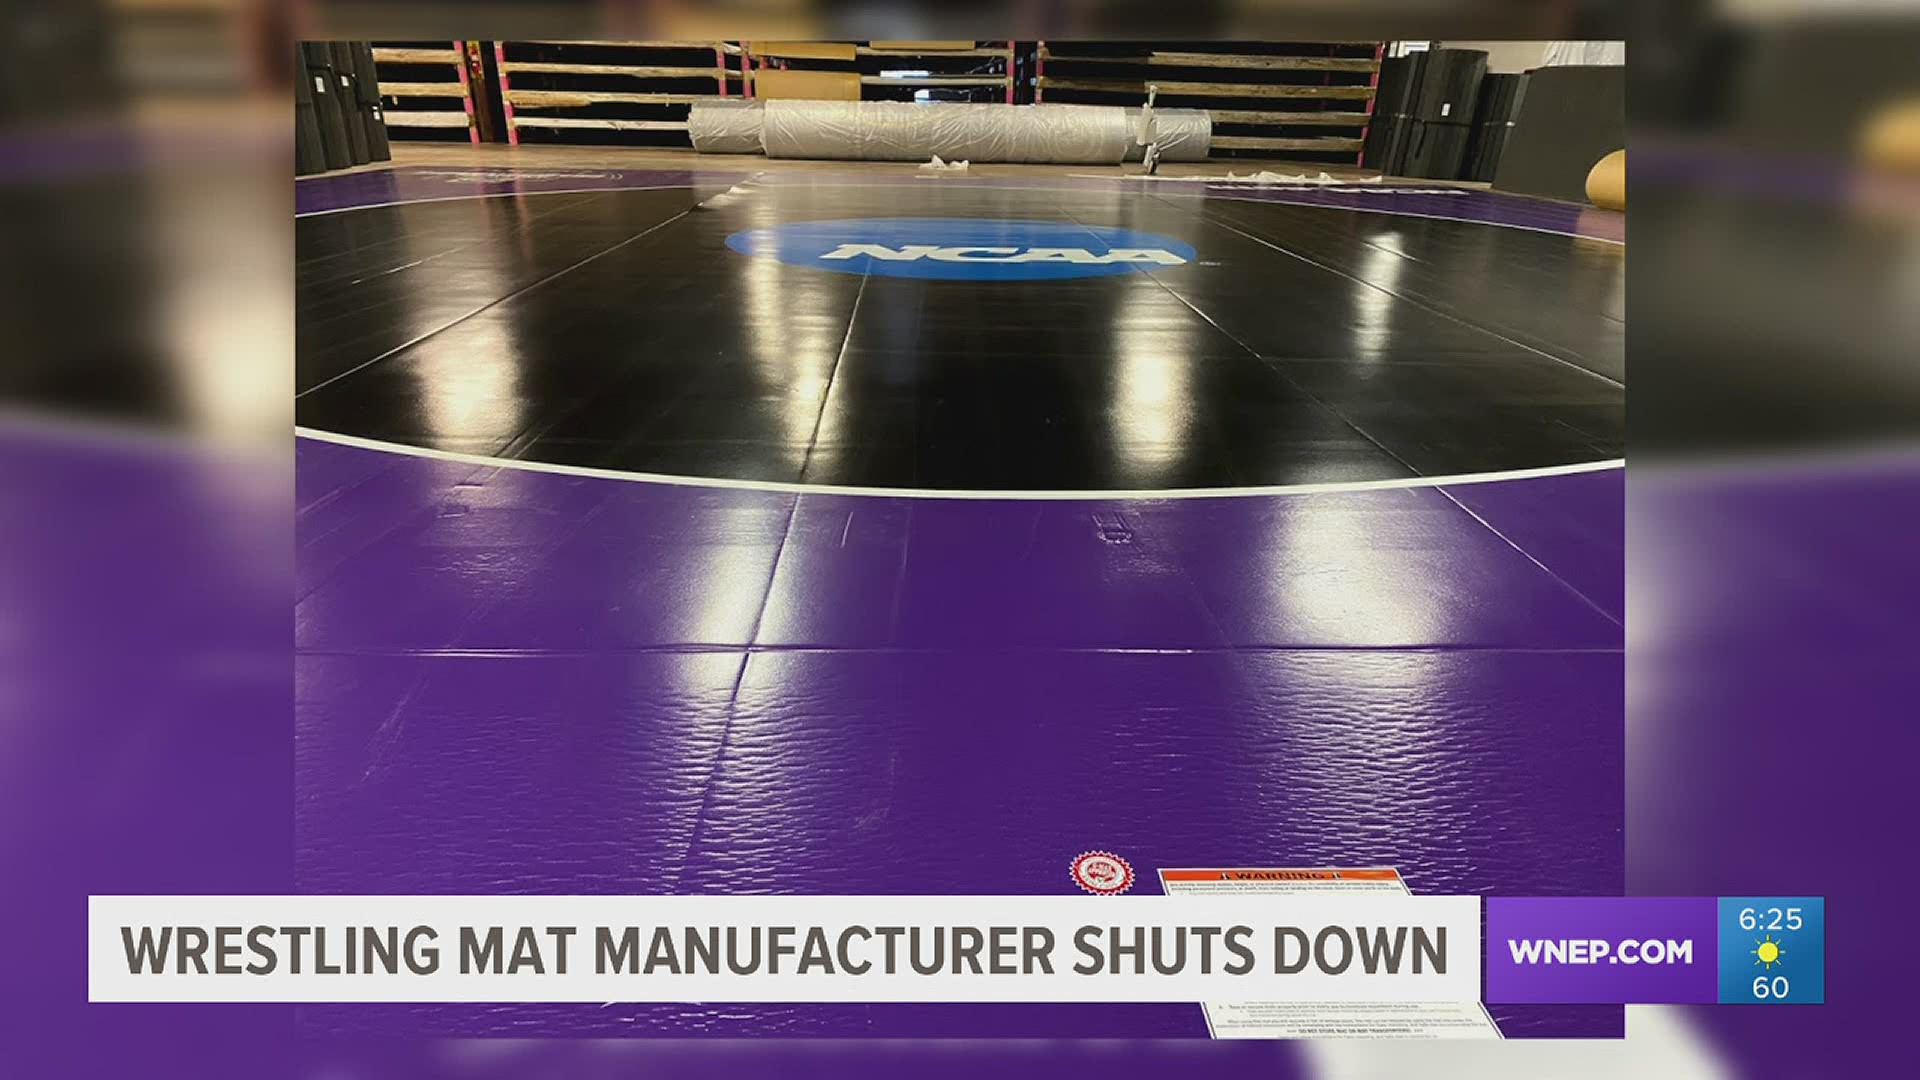 Resilite Mat Manufacturer Company in Northumberland County made the mats for the NCAA Wrestling Championships